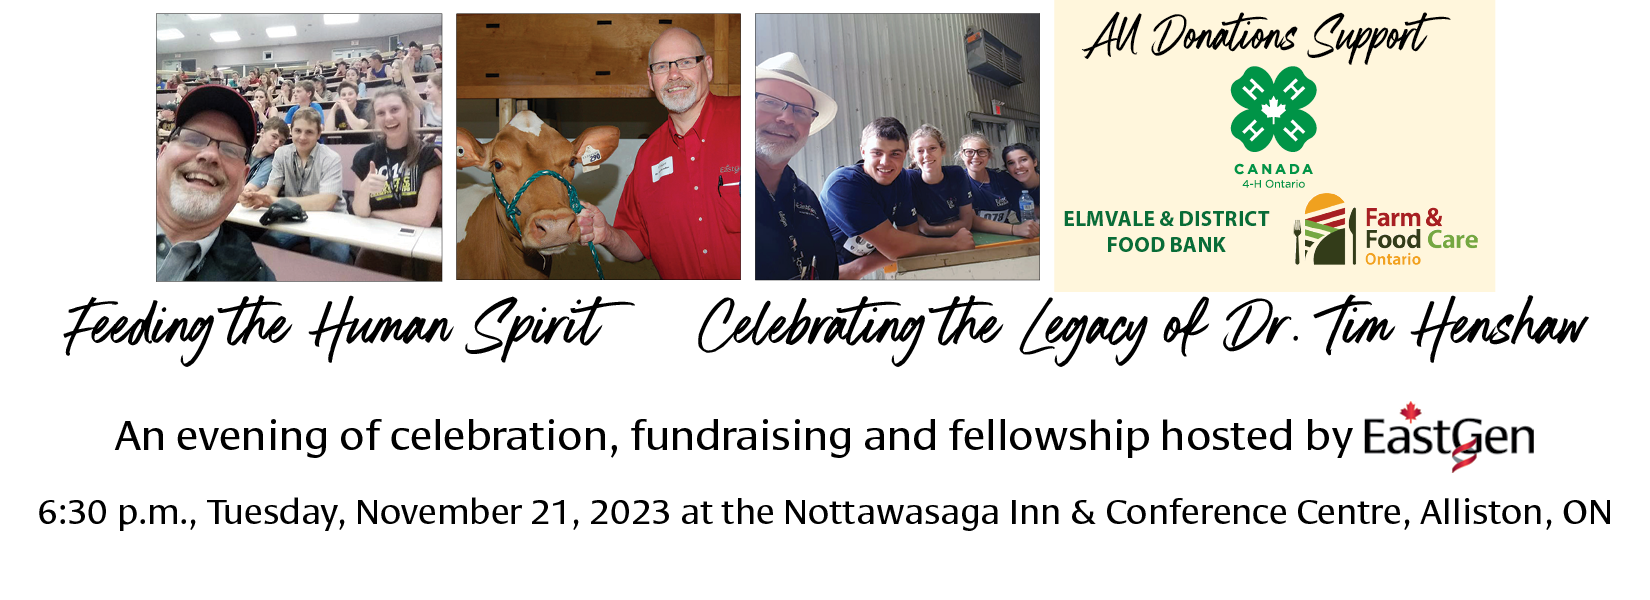 Auction Page - Feeding the Human Spirit - Celebrating the Legacy of Dr. Tim Henshaw - Presented by EastGen